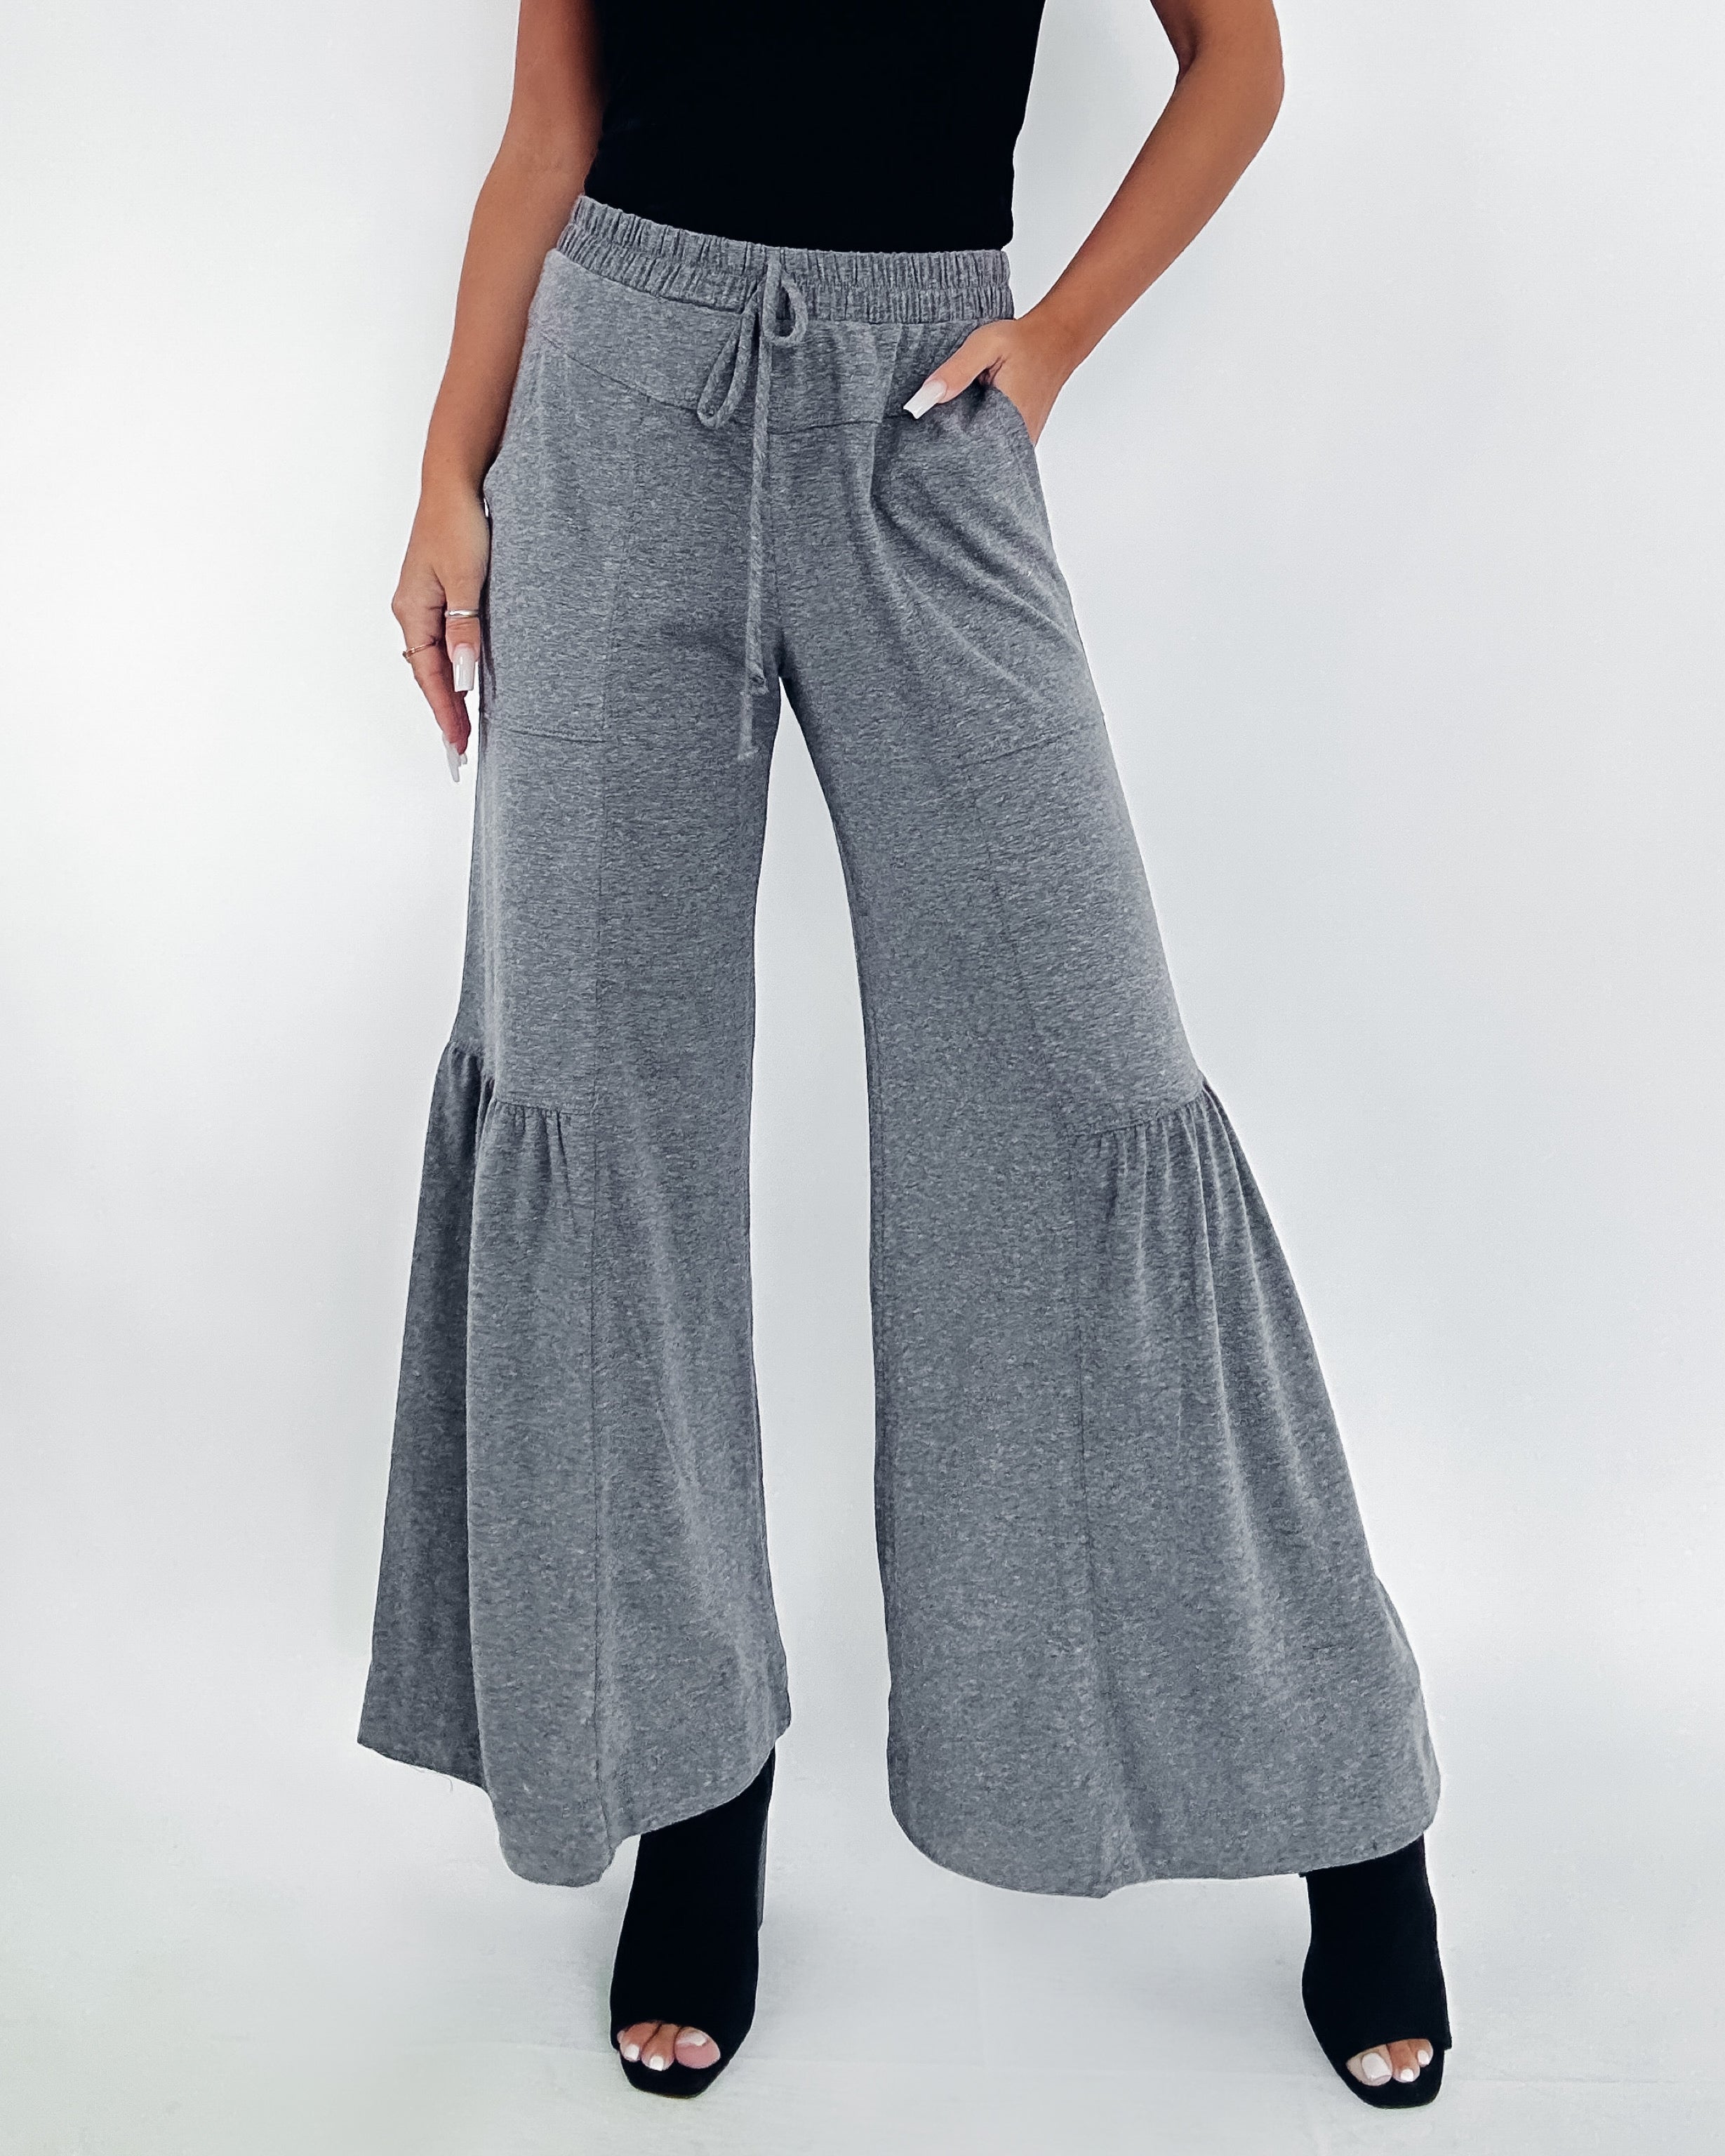 Wherever You Go Tie Pants- Charcoal